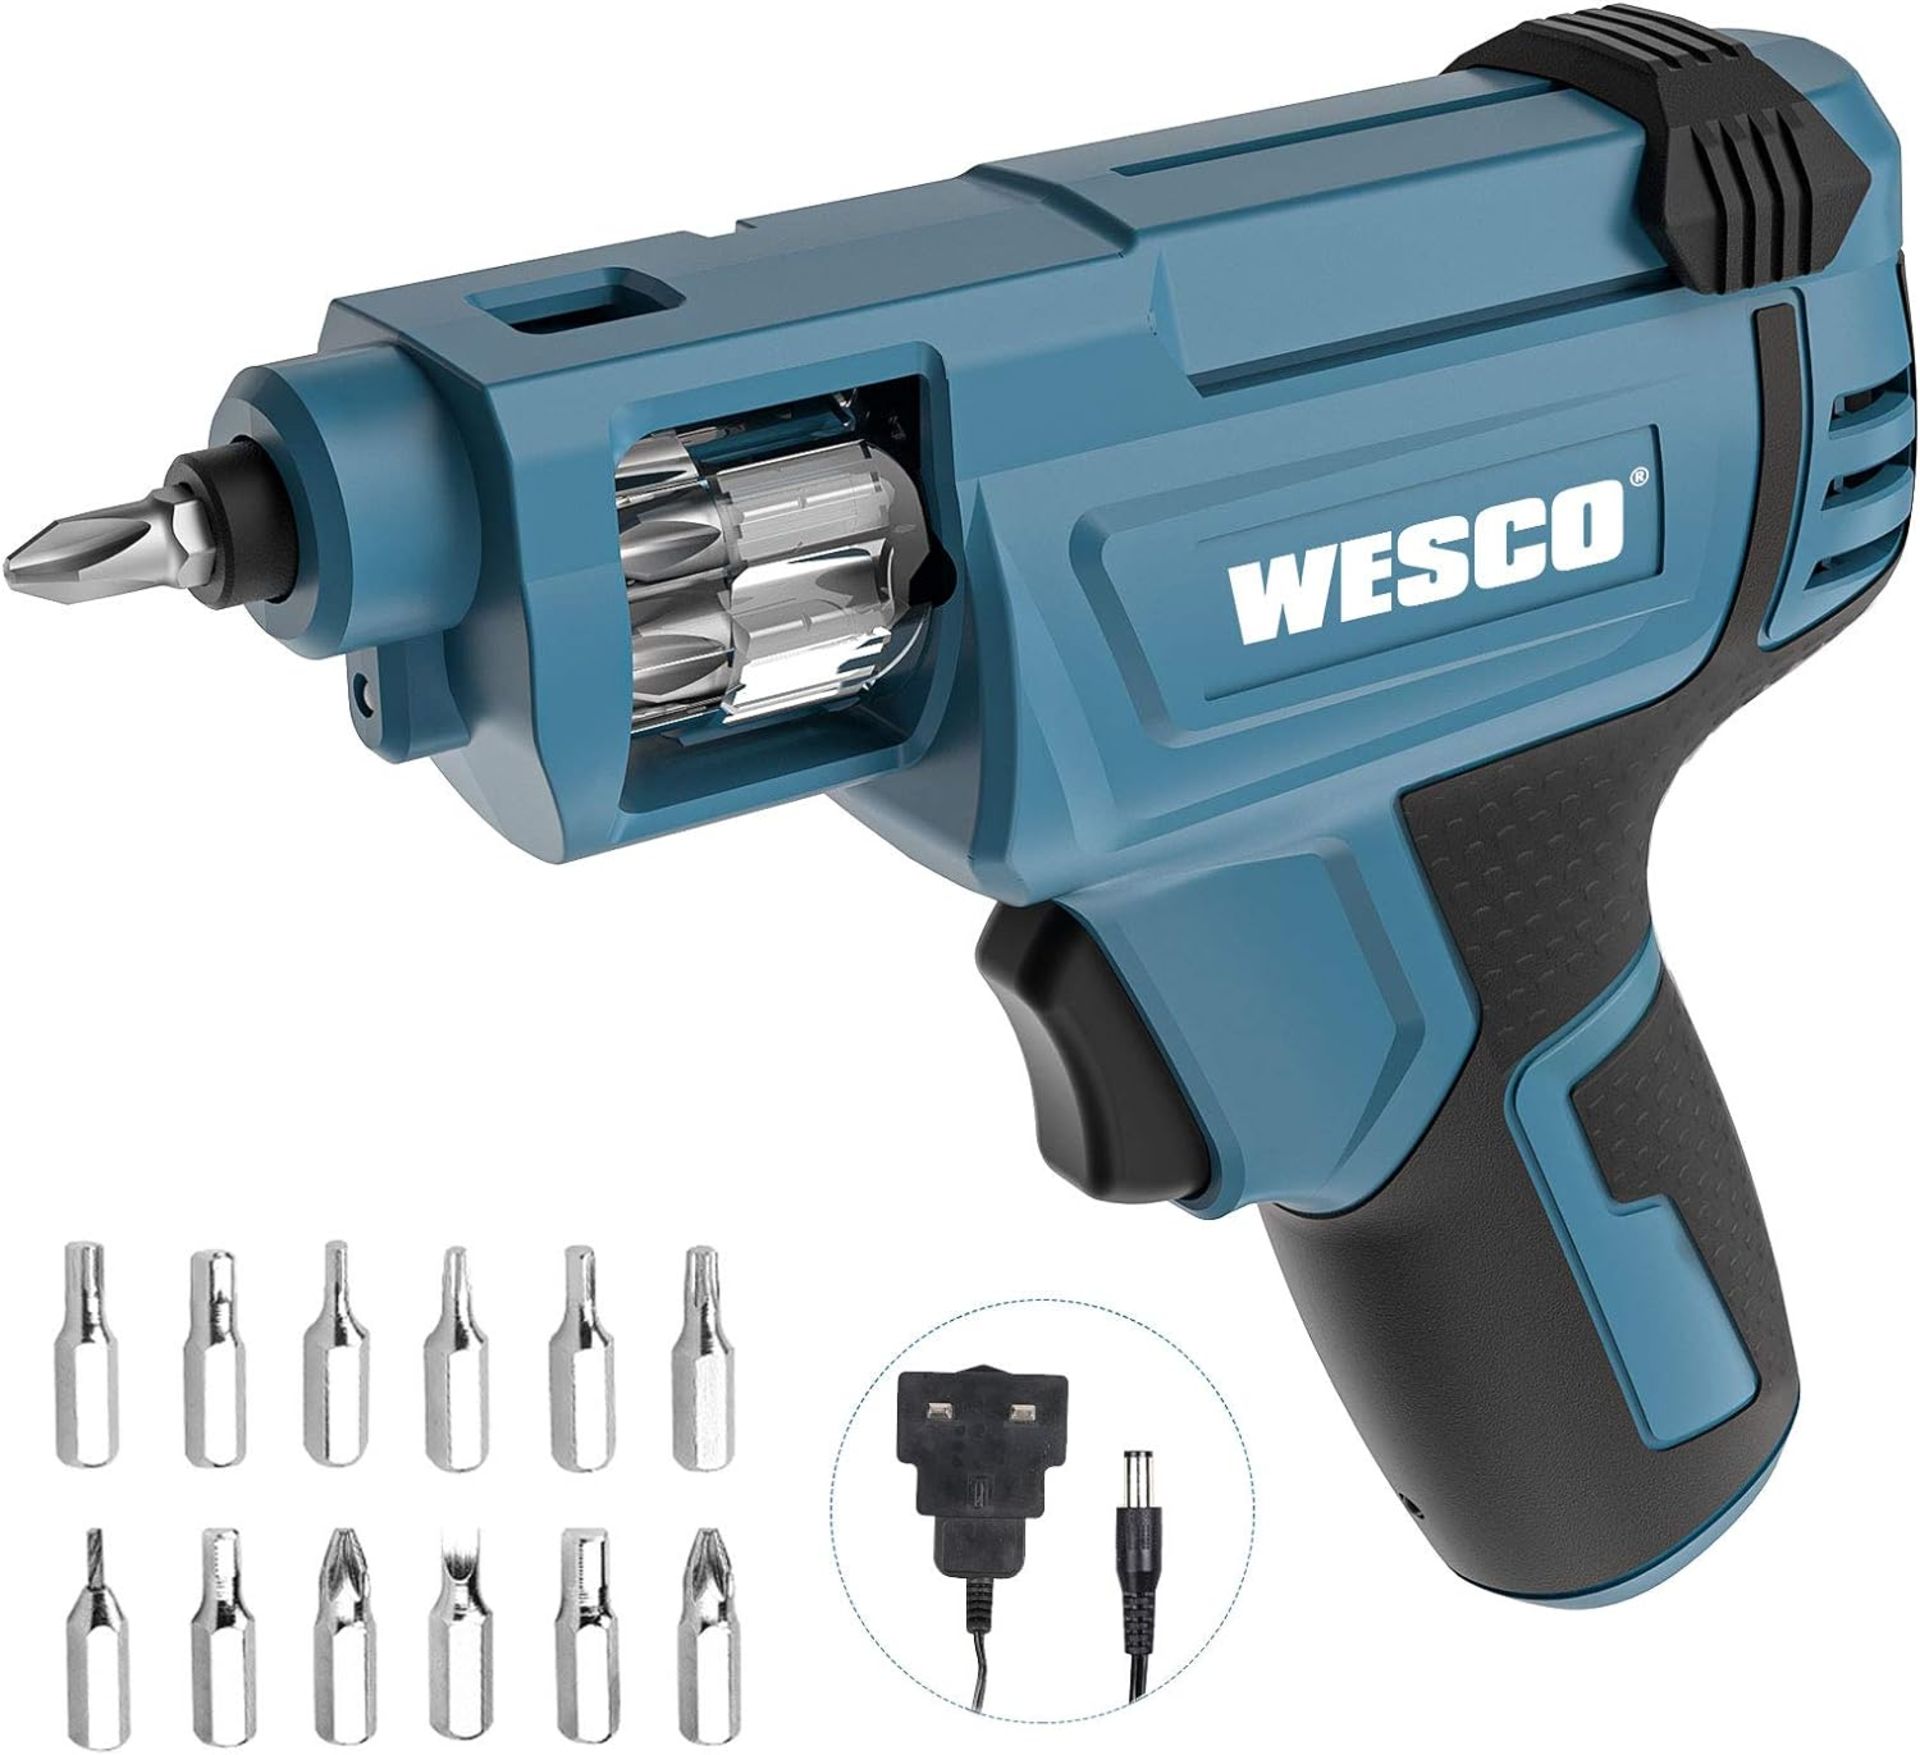 12x NEW & BOXED WESCO 3.6V 1.5Ah Lithium Screwdriver 3.5NM. RRP £30 EACH. Off-Set Head Makes Your